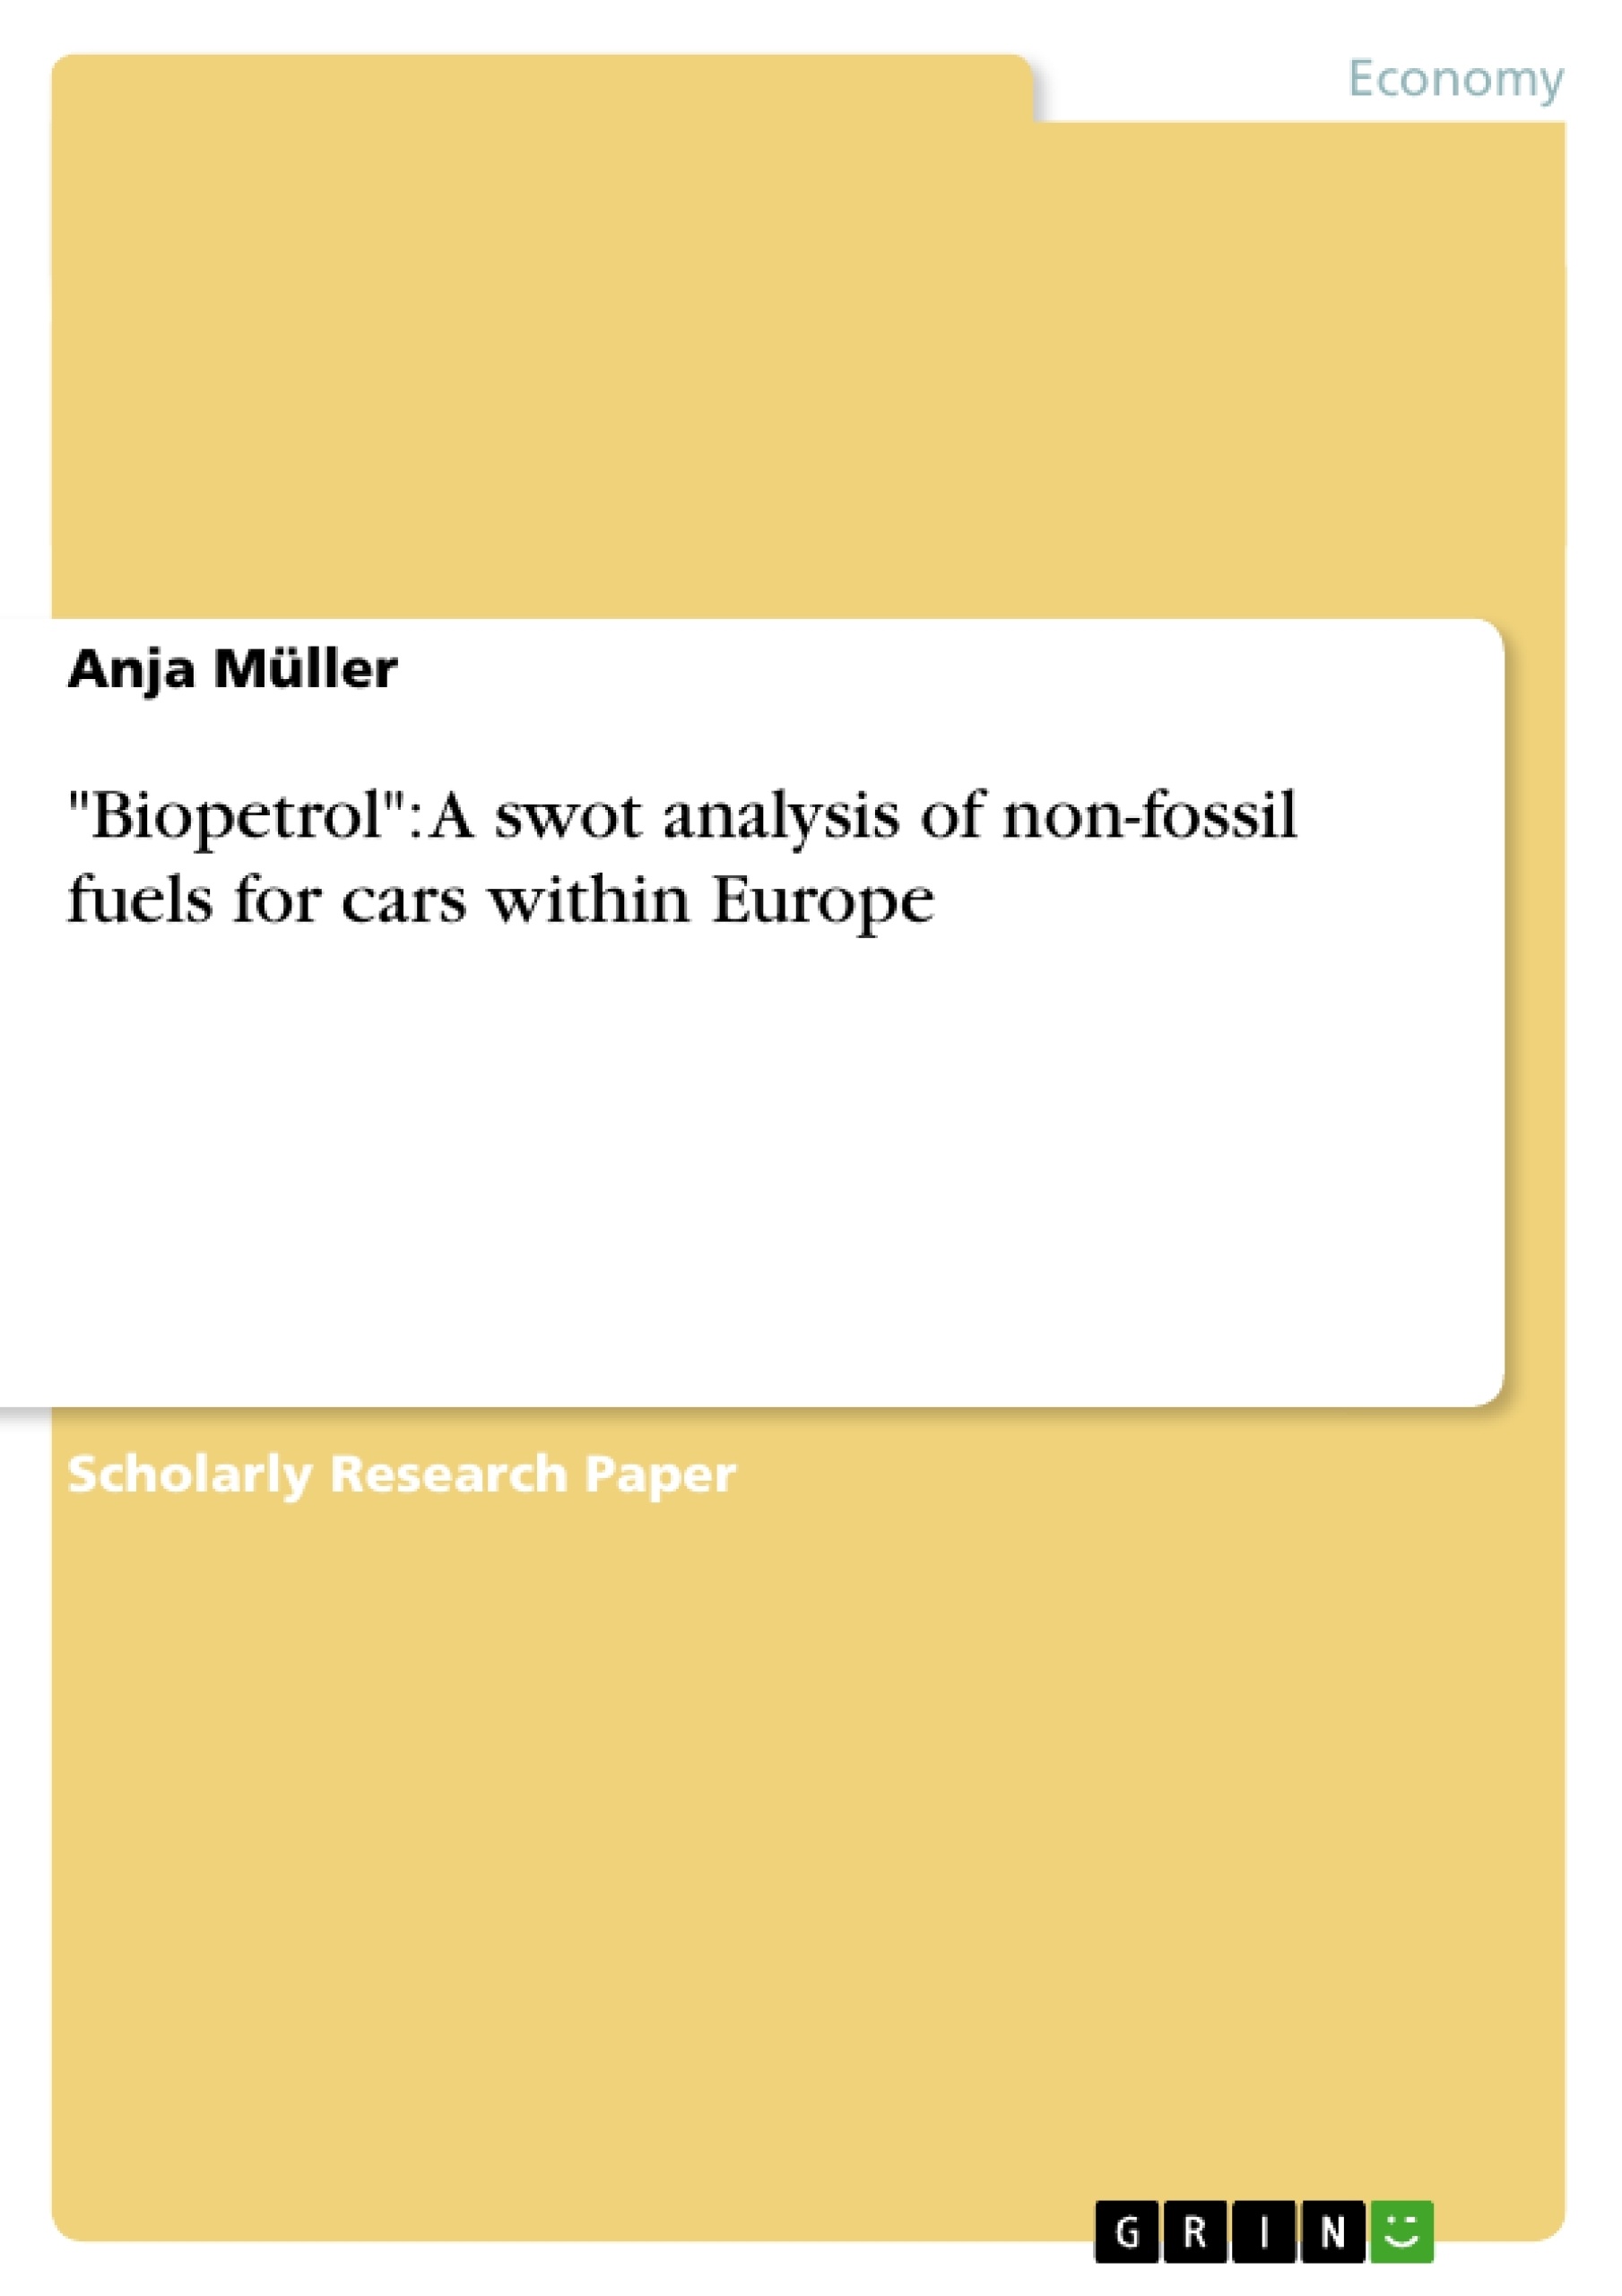 Titre: "Biopetrol": A swot analysis of non-fossil fuels for cars within Europe